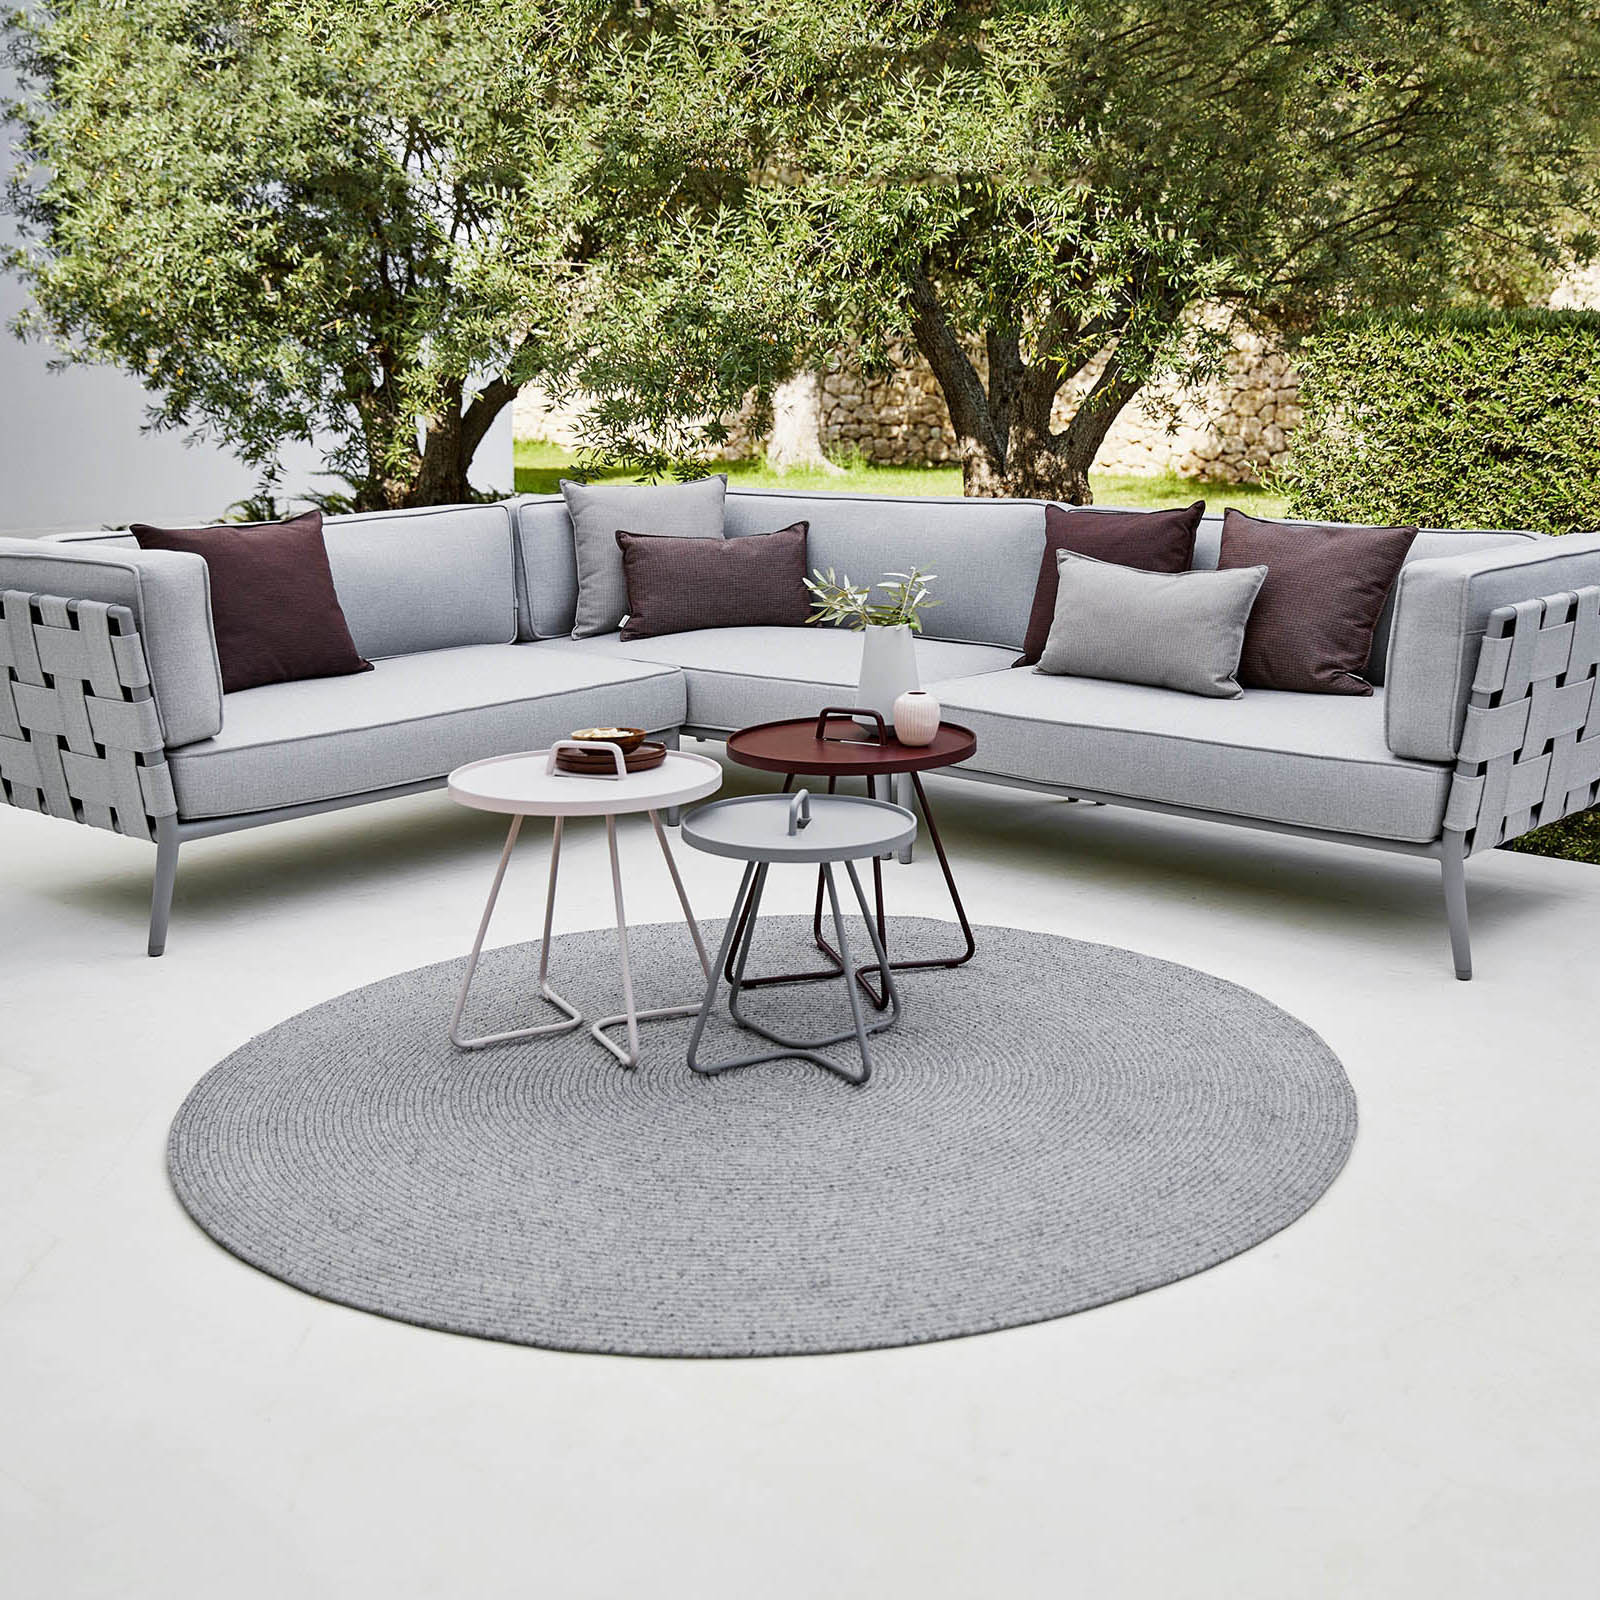 Conic 2-Sitzer Sofa-Modul links aus Cane-line AirTouch mit QuickDry in Grey